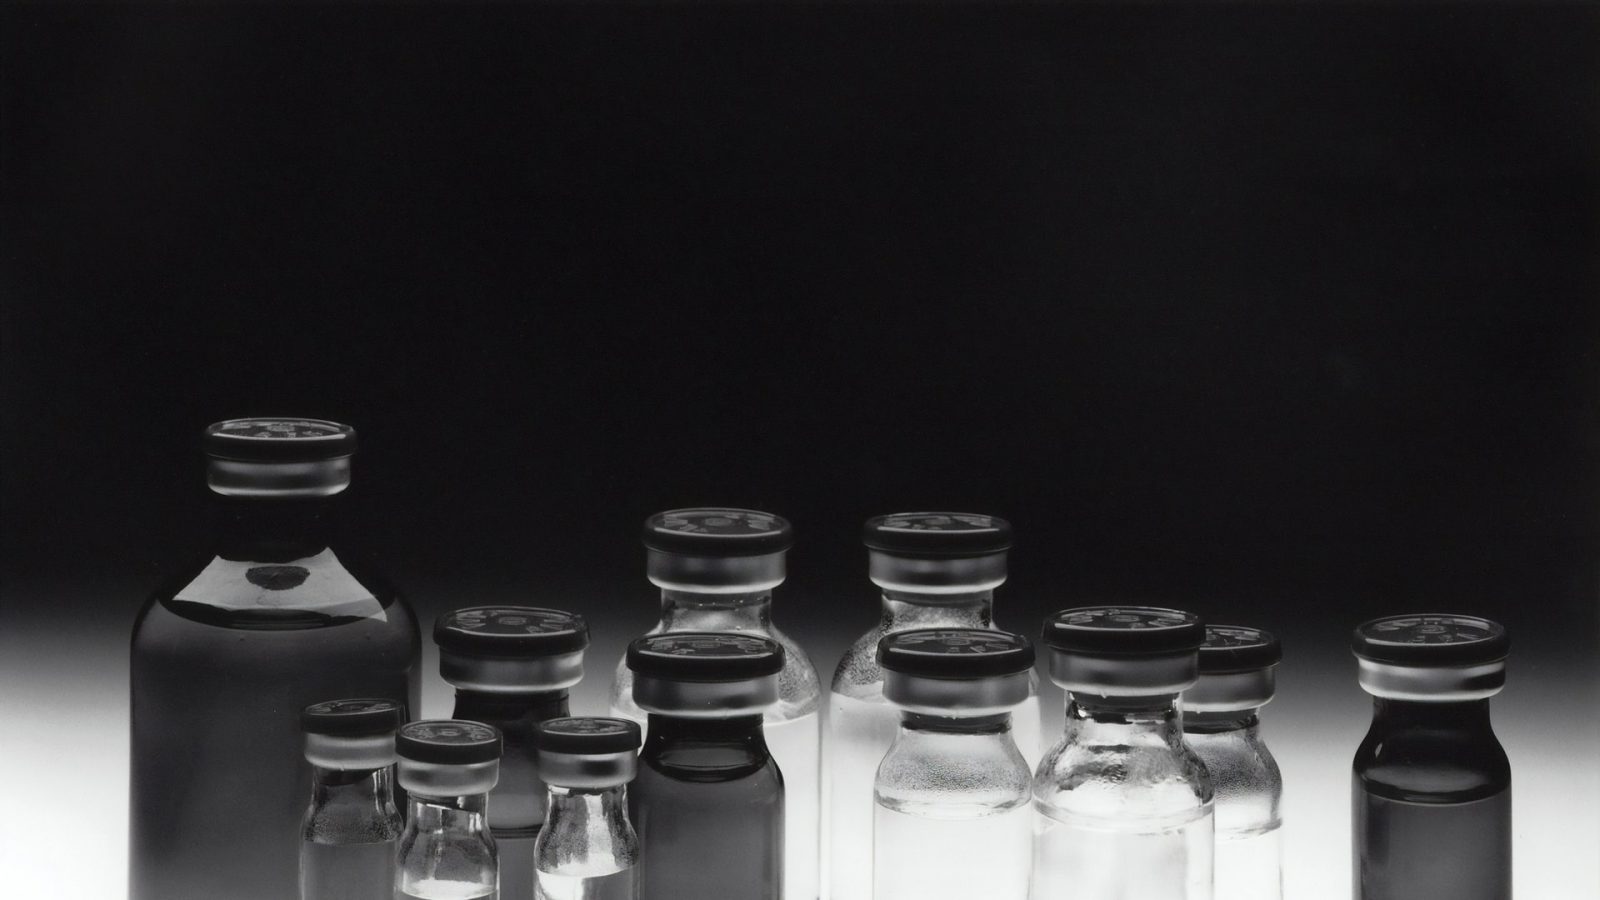 Chemotherapy vials representing an employee with cancer facing discrimination at work